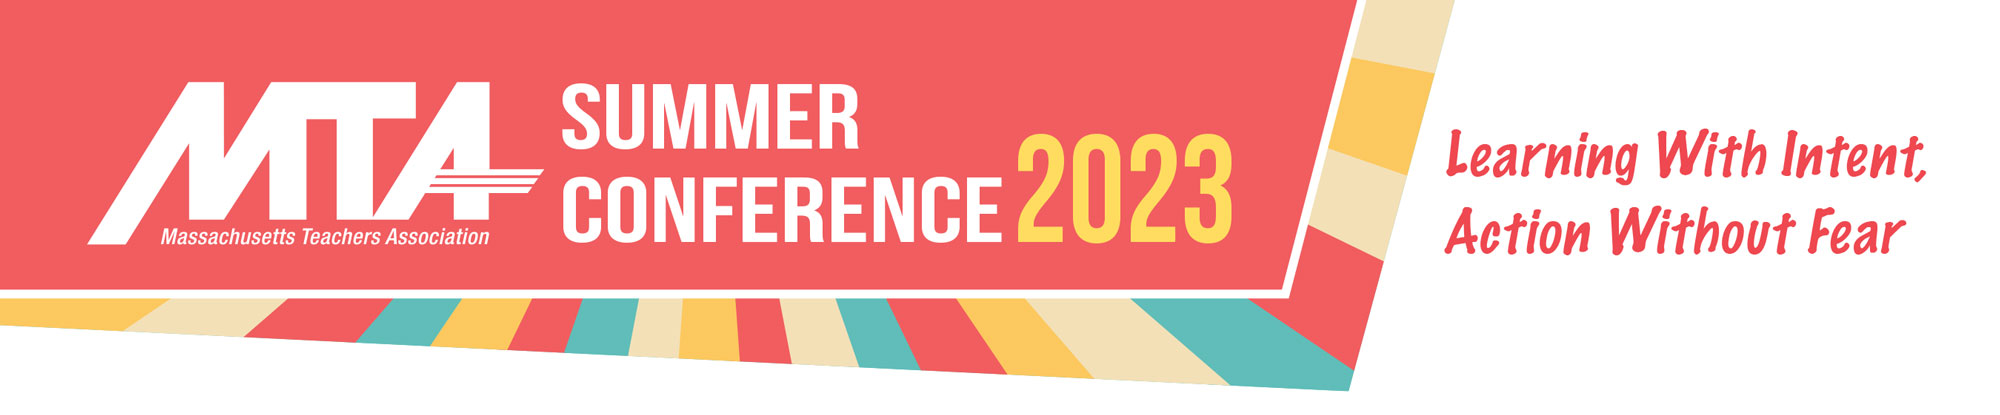 summer conference 2023